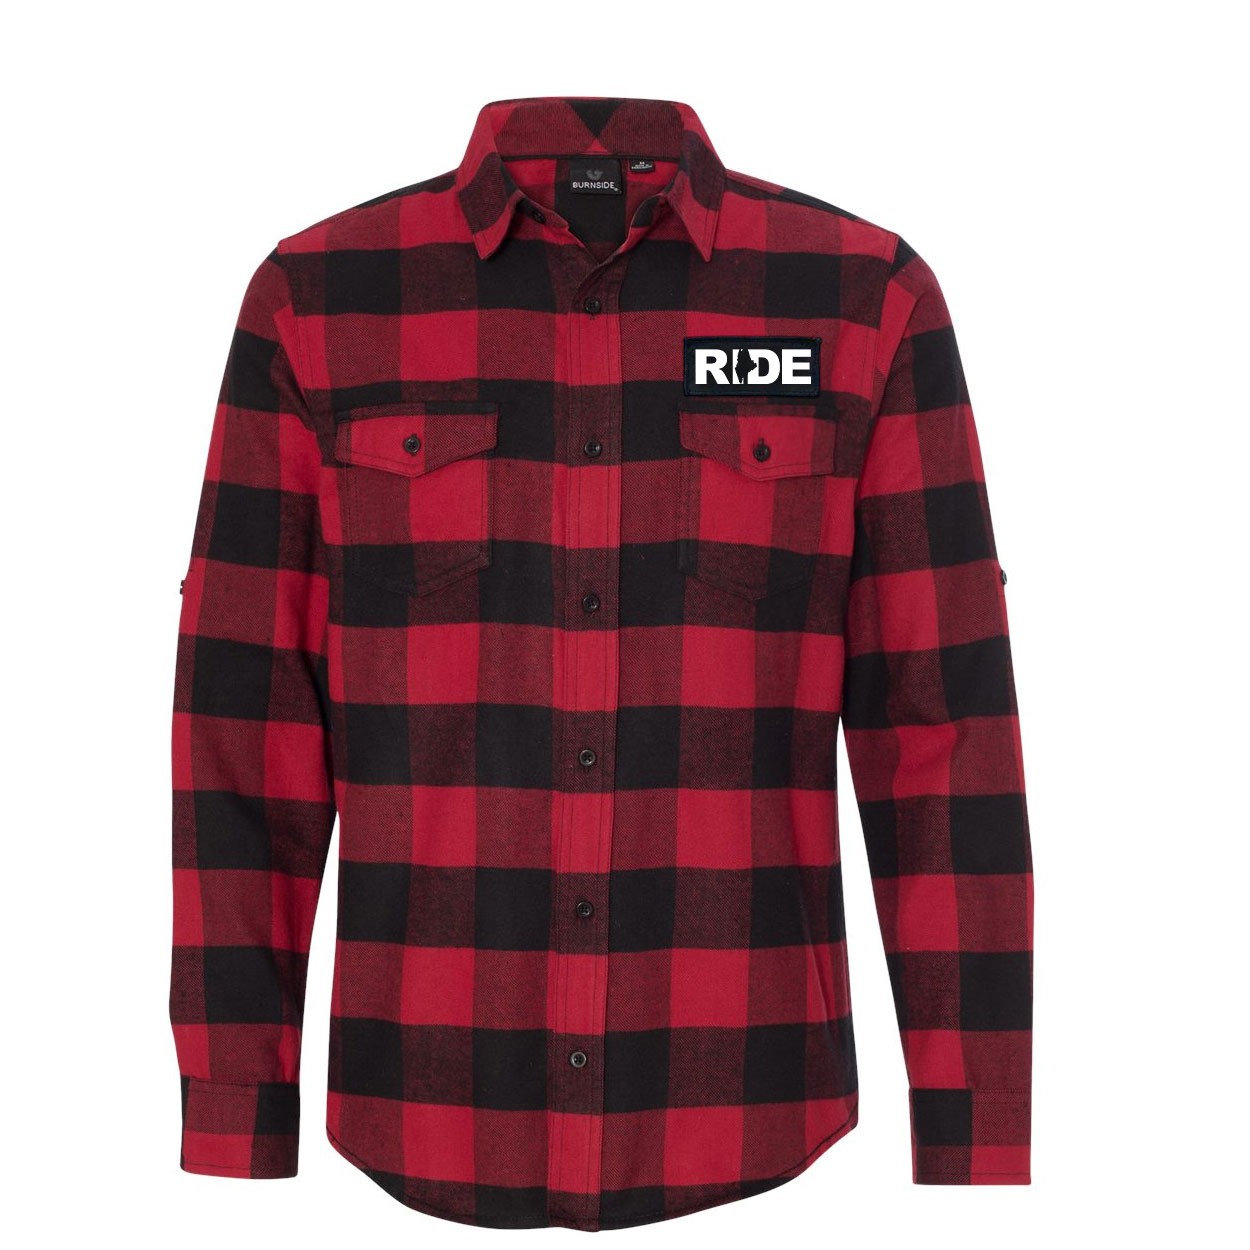 Ride Maine Classic Unisex Long Sleeve Woven Patch Flannel Shirt Red/Black Buffalo (White Logo)